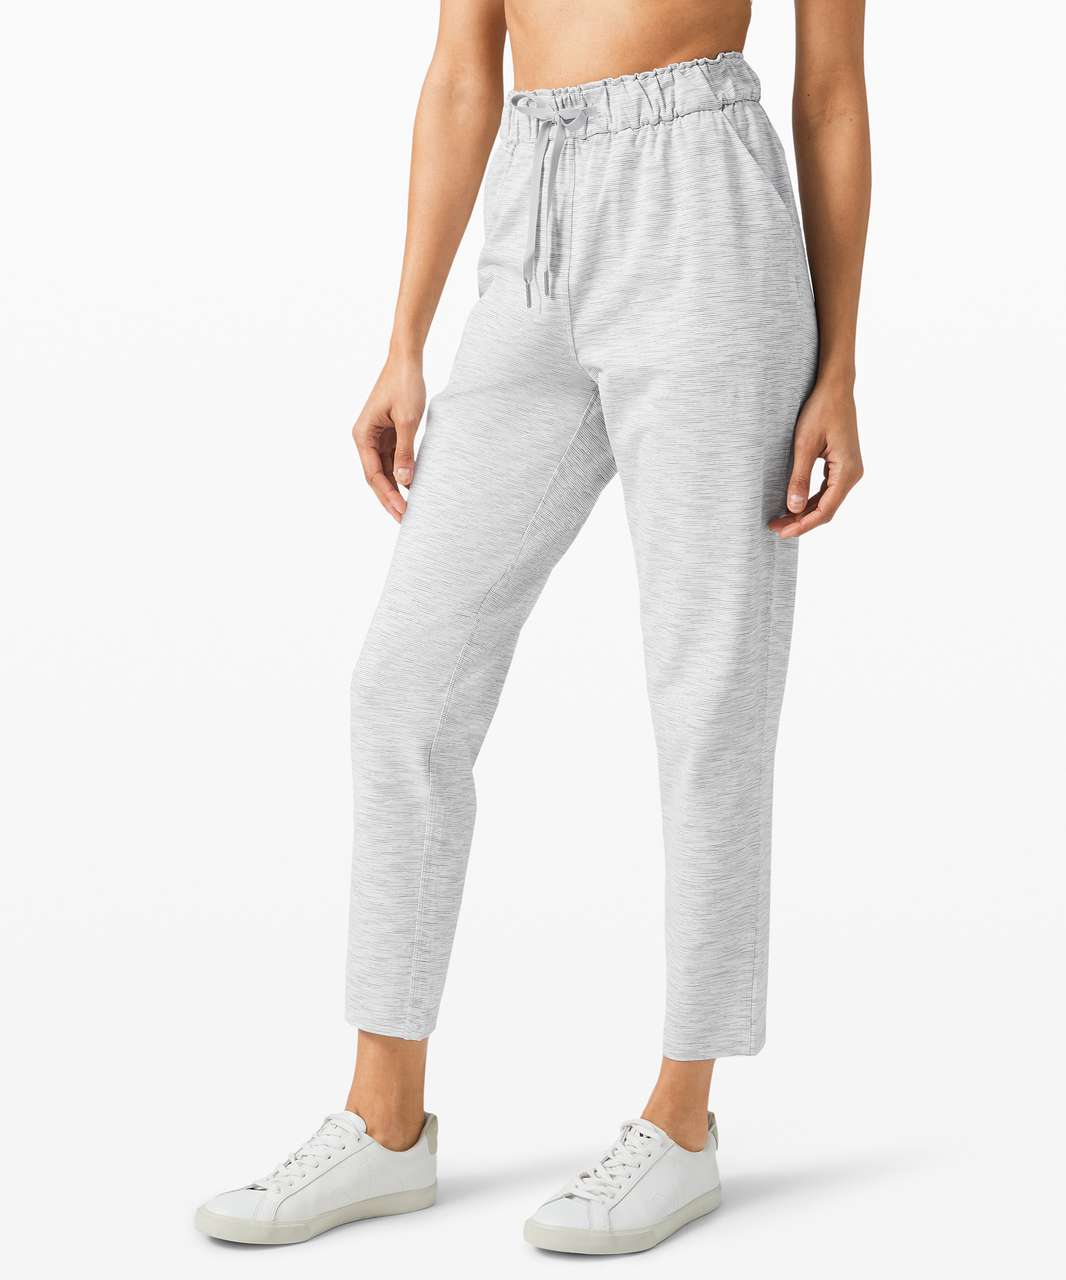 Lululemon Keep Moving Pant High-Rise - Wee Are From Space Nimbus Battleship